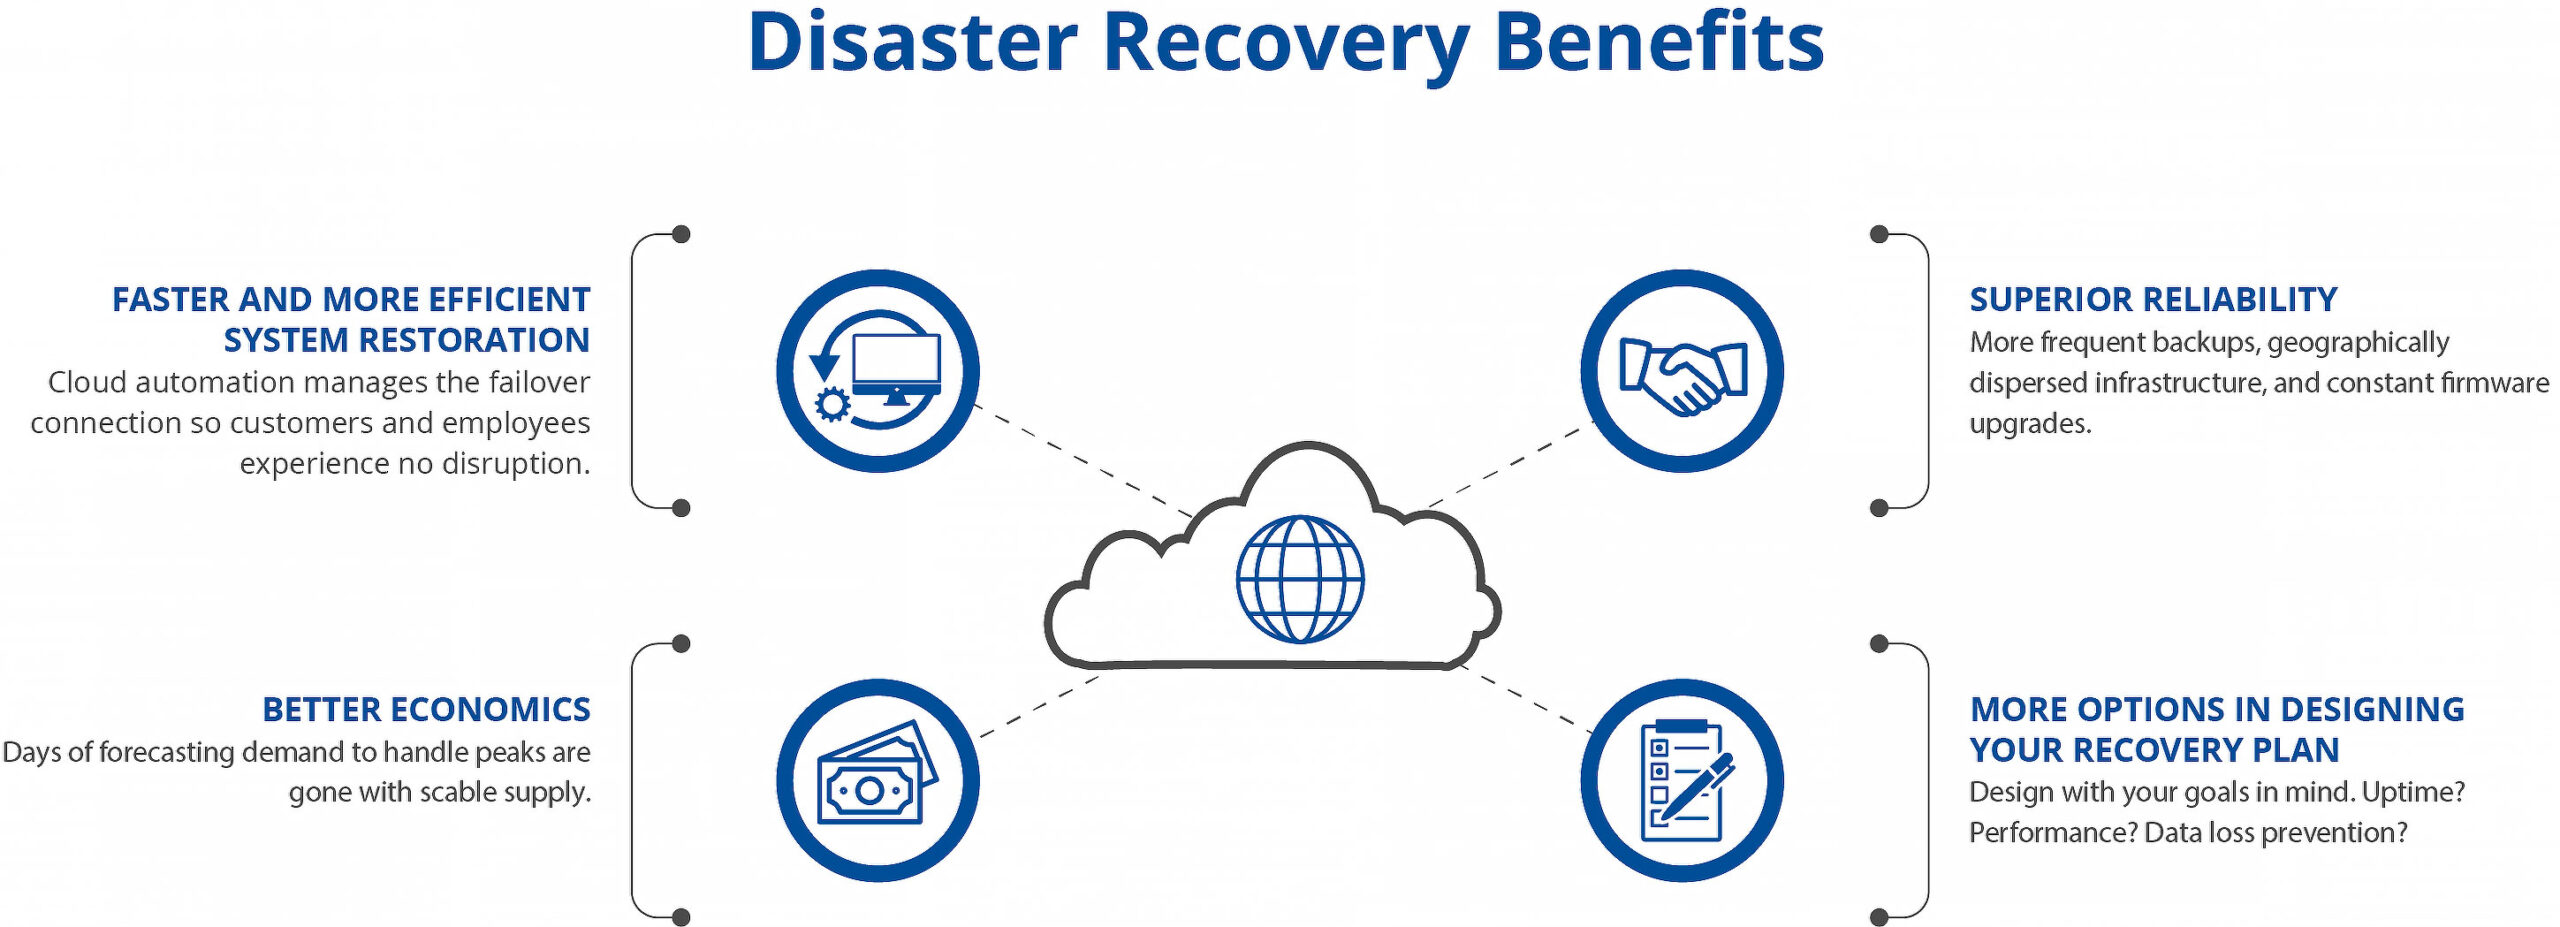 disaster recovery benefits graphic